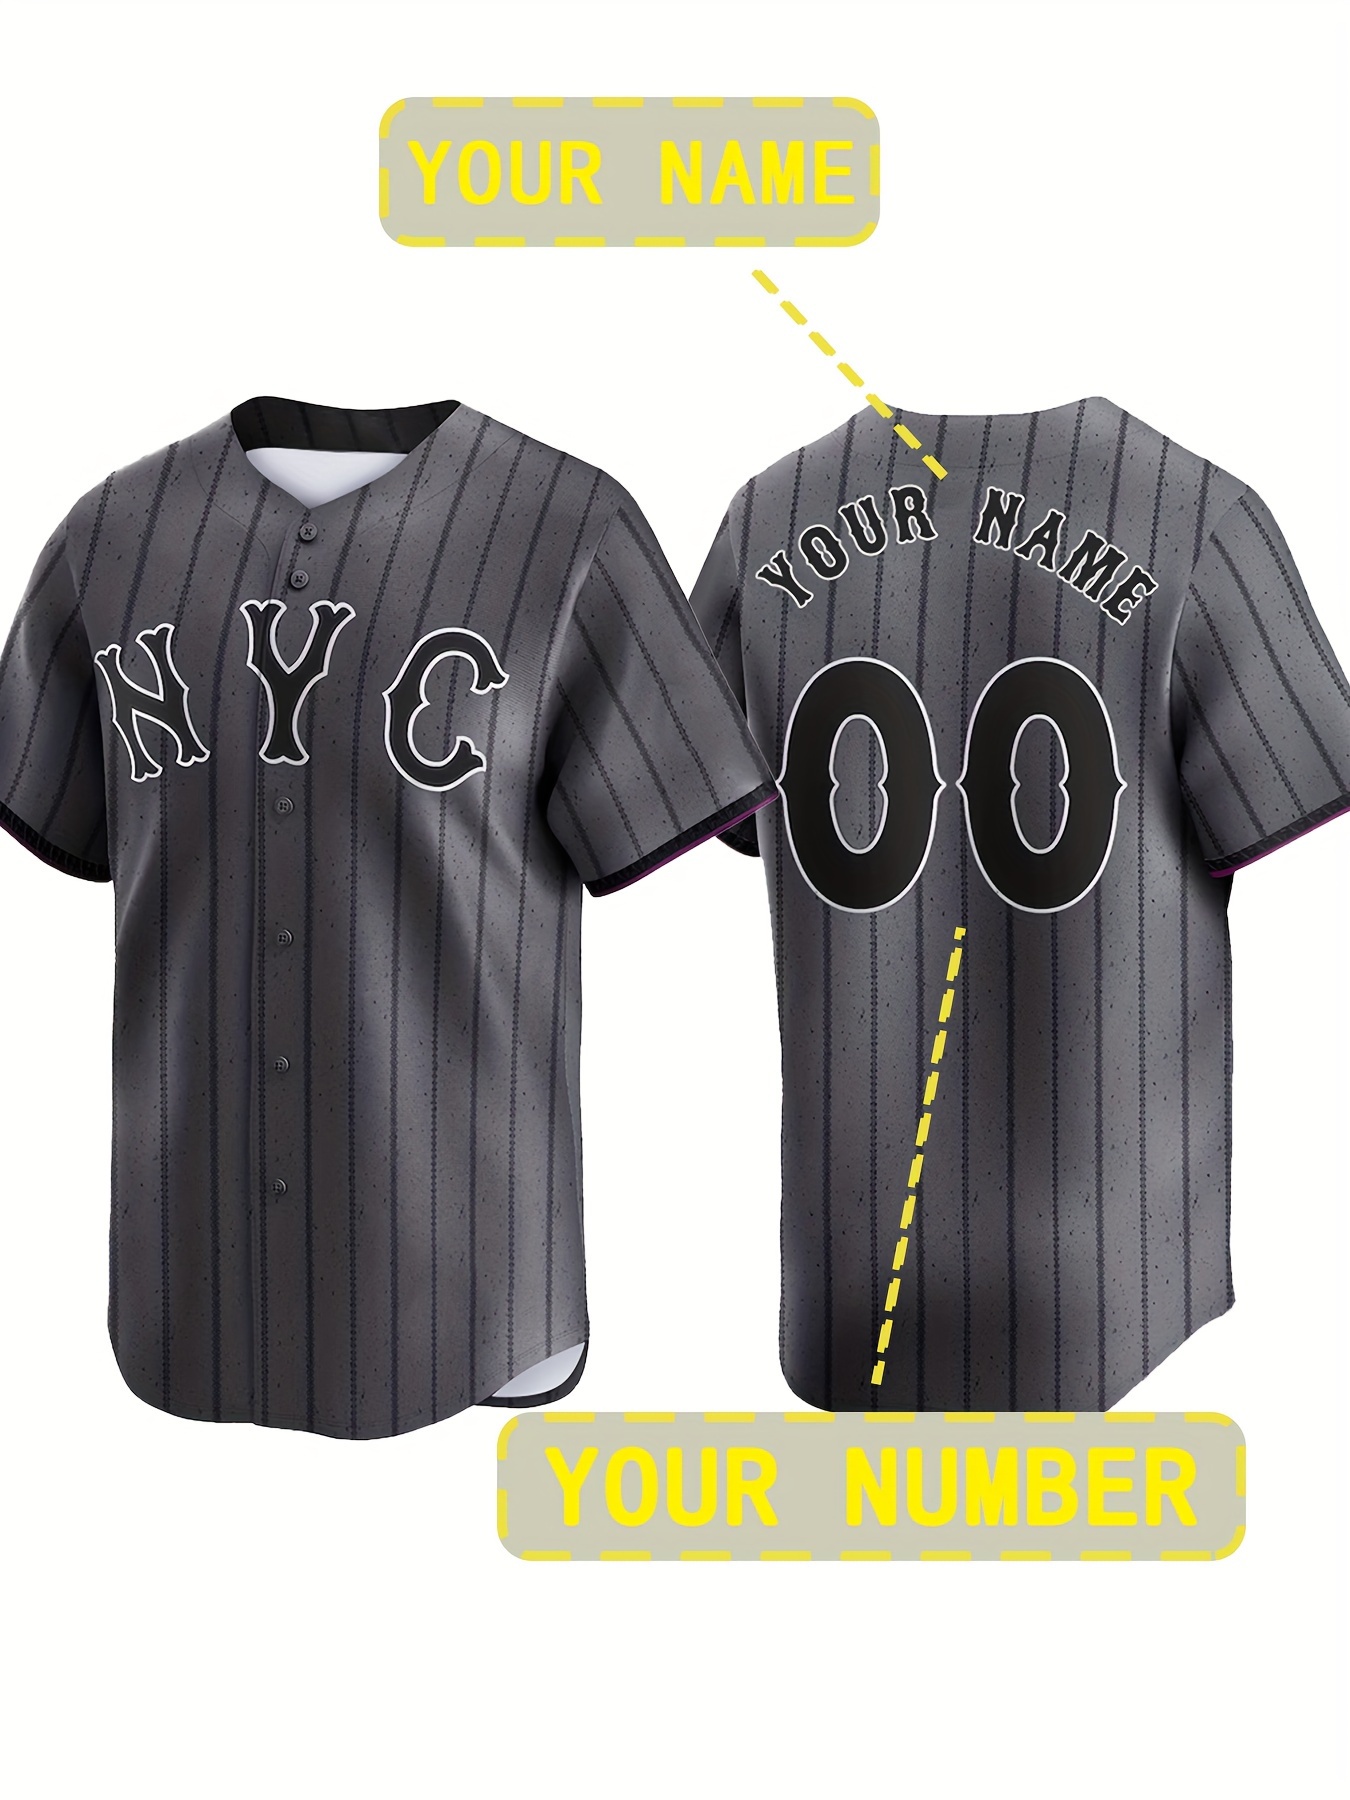 Customizable Name And Number Men's Baseball Jersey Embroidered Outdoor Daily Leisure Sports Customization S-3XL